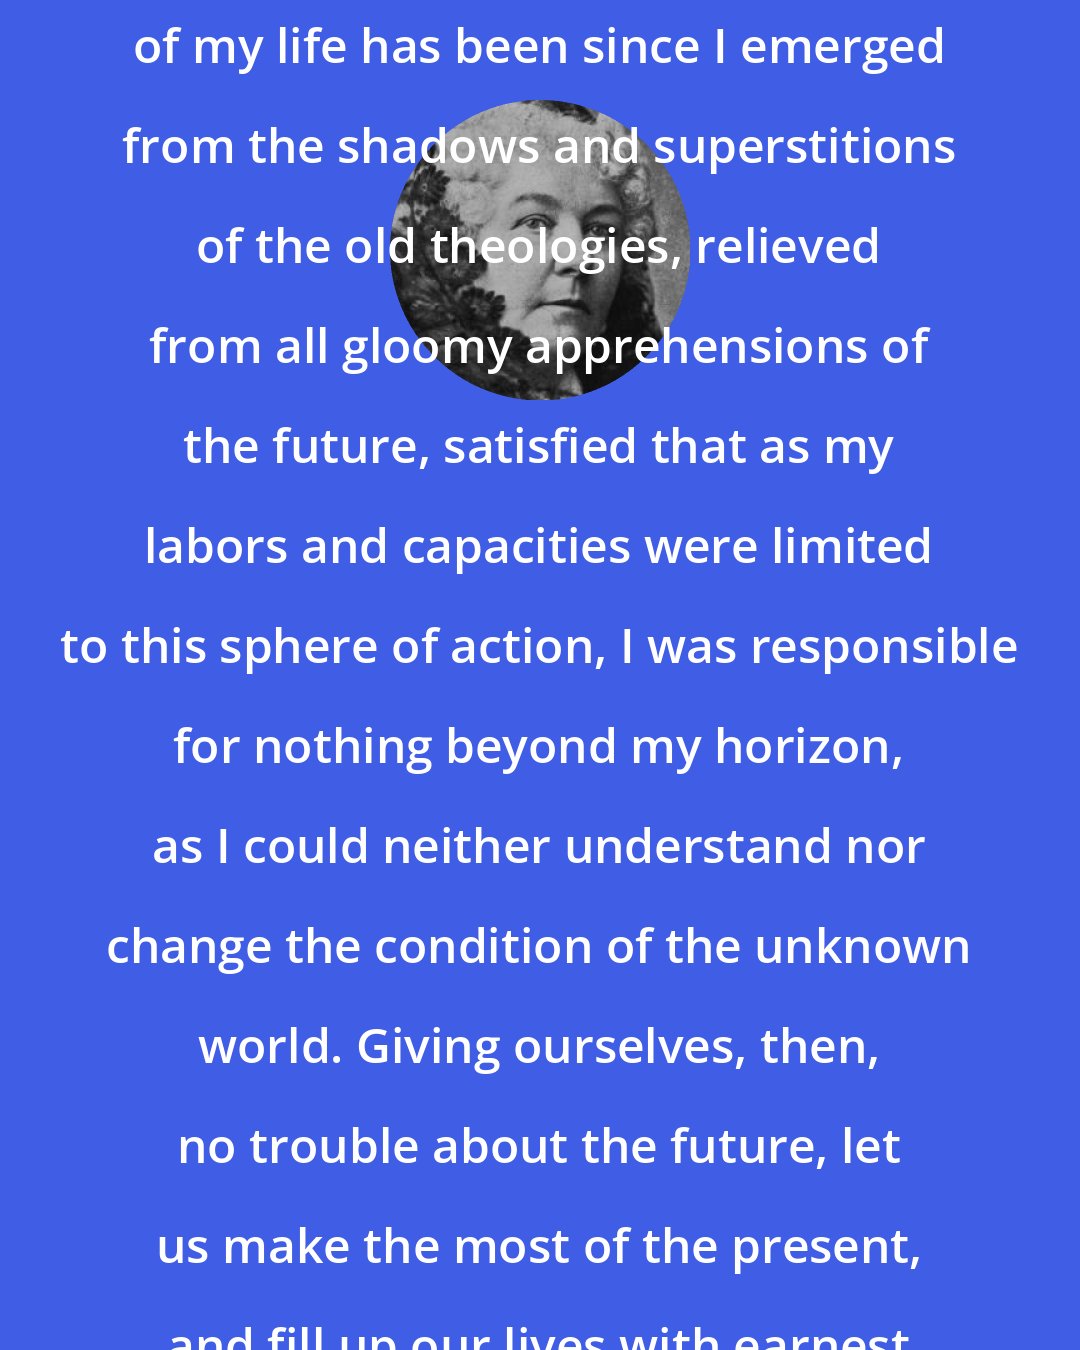 Elizabeth Cady Stanton: I can say that the happiest period of my life has been since I emerged from the shadows and superstitions of the old theologies, relieved from all gloomy apprehensions of the future, satisfied that as my labors and capacities were limited to this sphere of action, I was responsible for nothing beyond my horizon, as I could neither understand nor change the condition of the unknown world. Giving ourselves, then, no trouble about the future, let us make the most of the present, and fill up our lives with earnest work here.